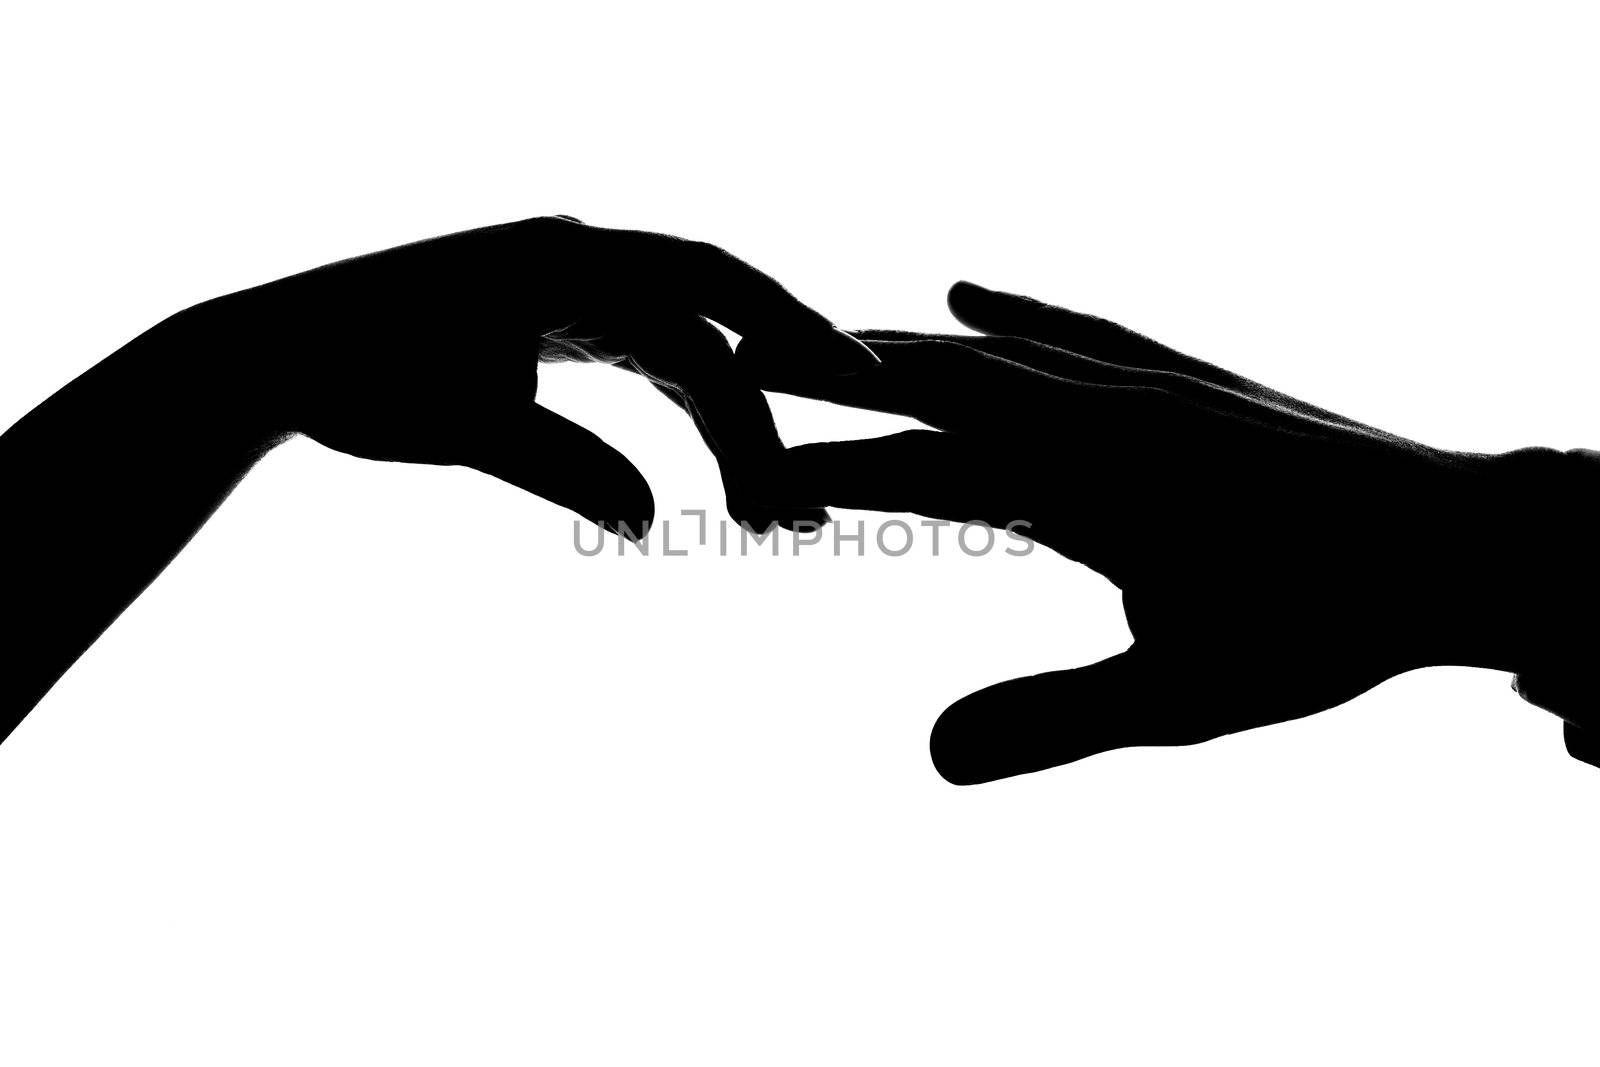 An image of silhouette of two hands. Man and woman.